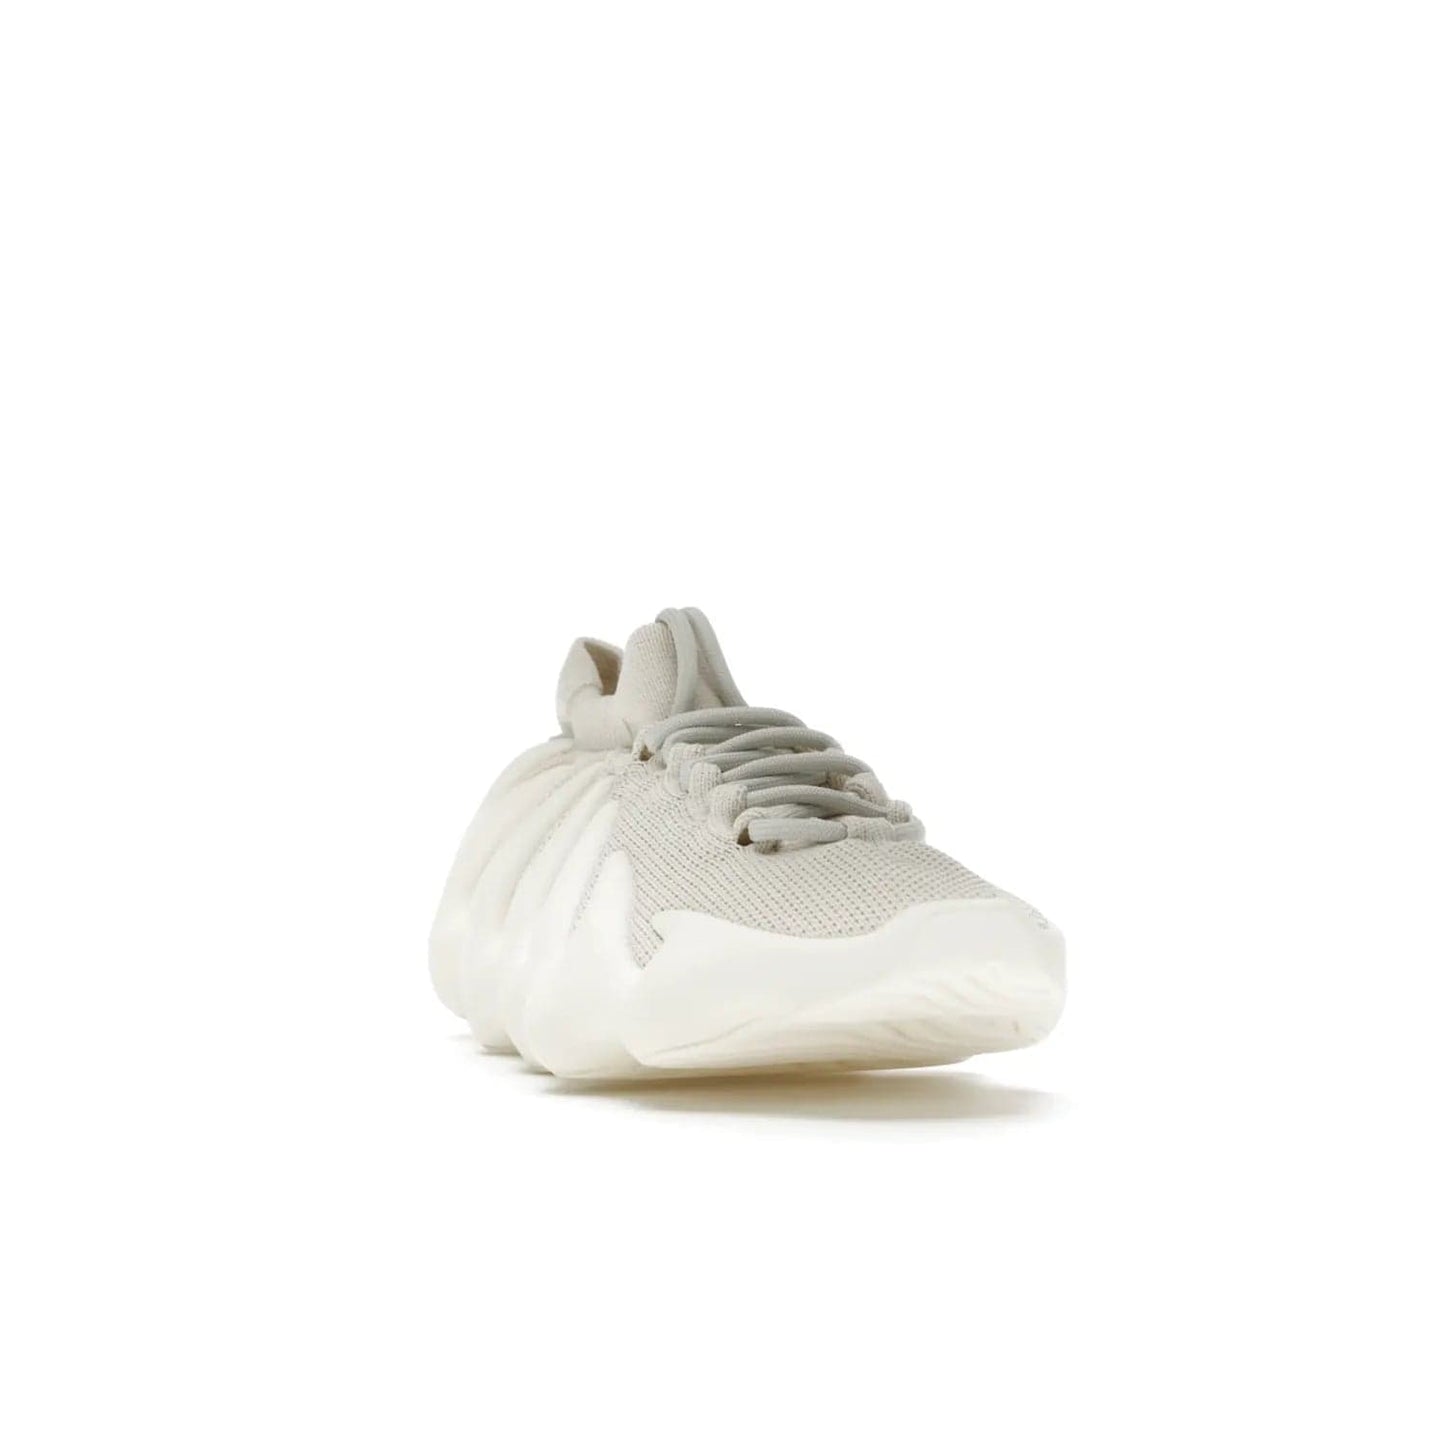 adidas Yeezy 450 Cloud White - Image 8 - Only at www.BallersClubKickz.com - Experience the future with the adidas Yeezy 450 Cloud White. A two-piece design featuring an extreme foam sole and mesh upper, this silhouette is expected to release in March 2021. Get your hands on this striking Cloud White/Cloud White colorway and stand out in the crowd.